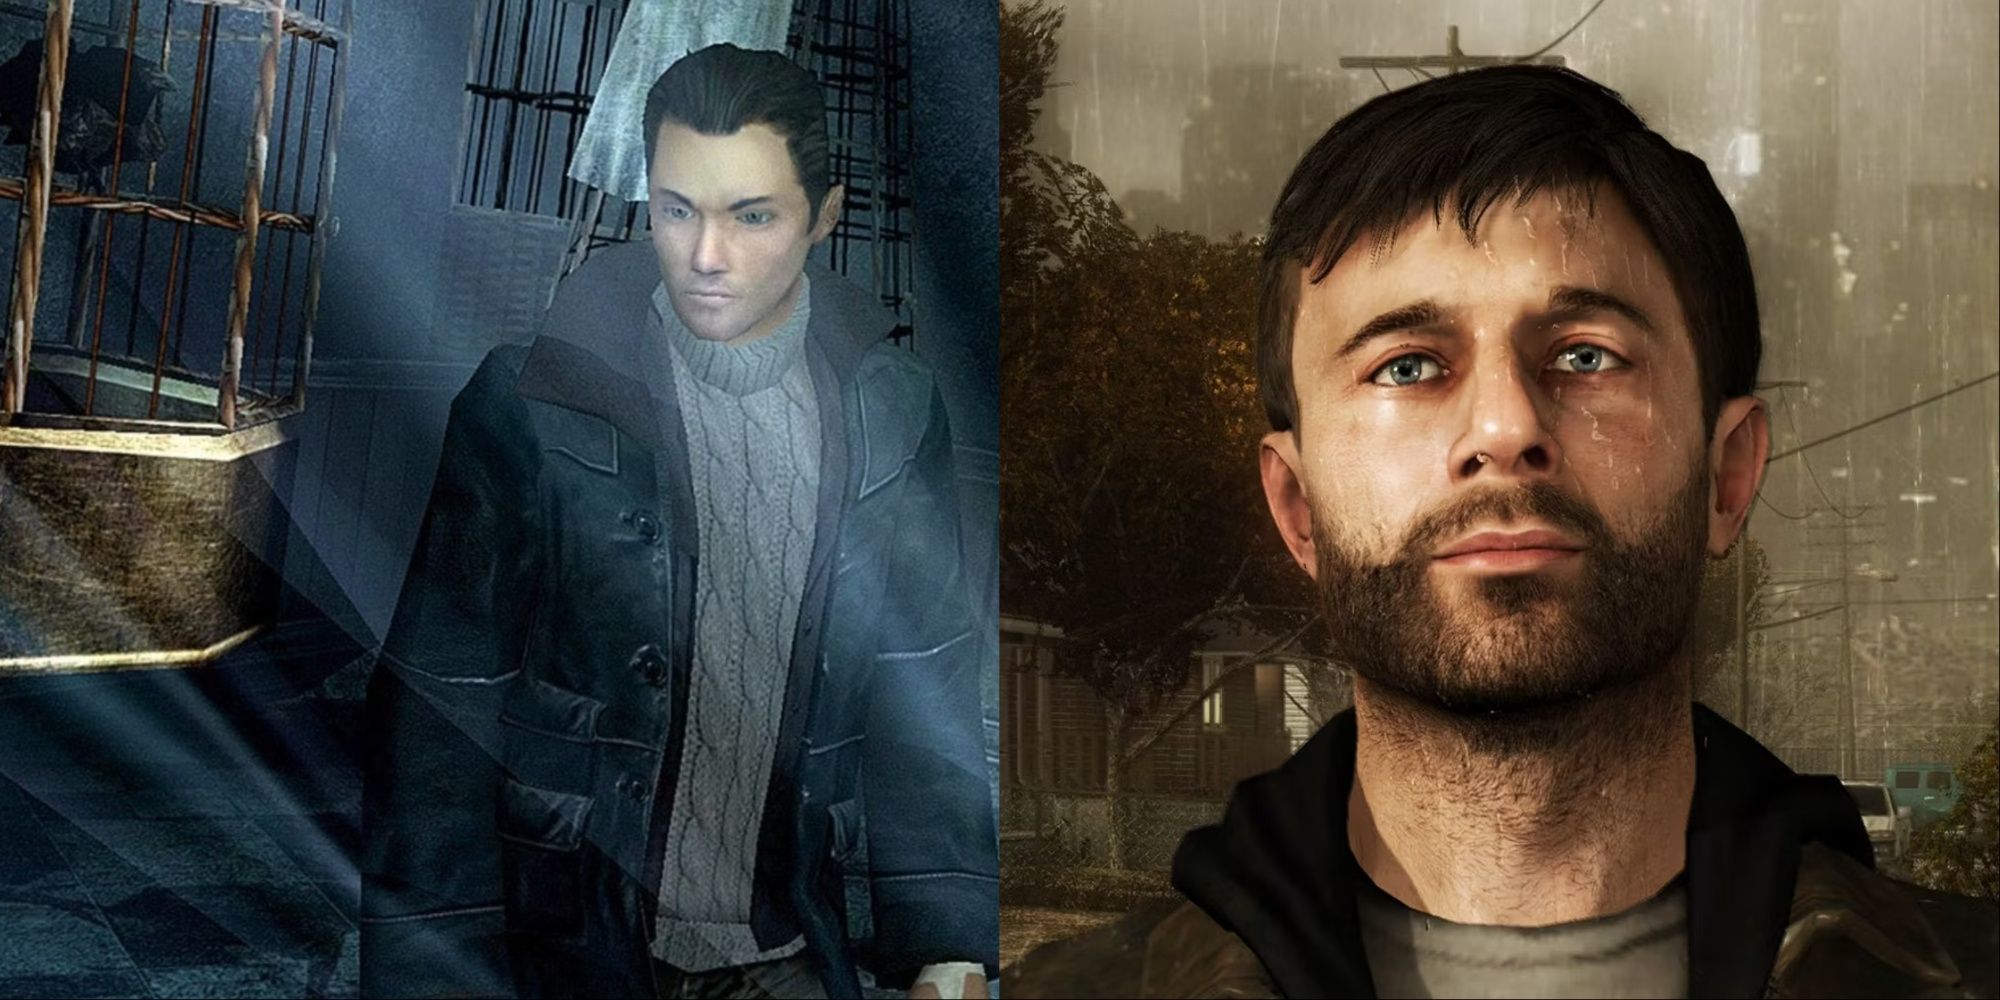 Fahrenheit: Indigo Prophecy And Heavy Rain footage of the protagonists